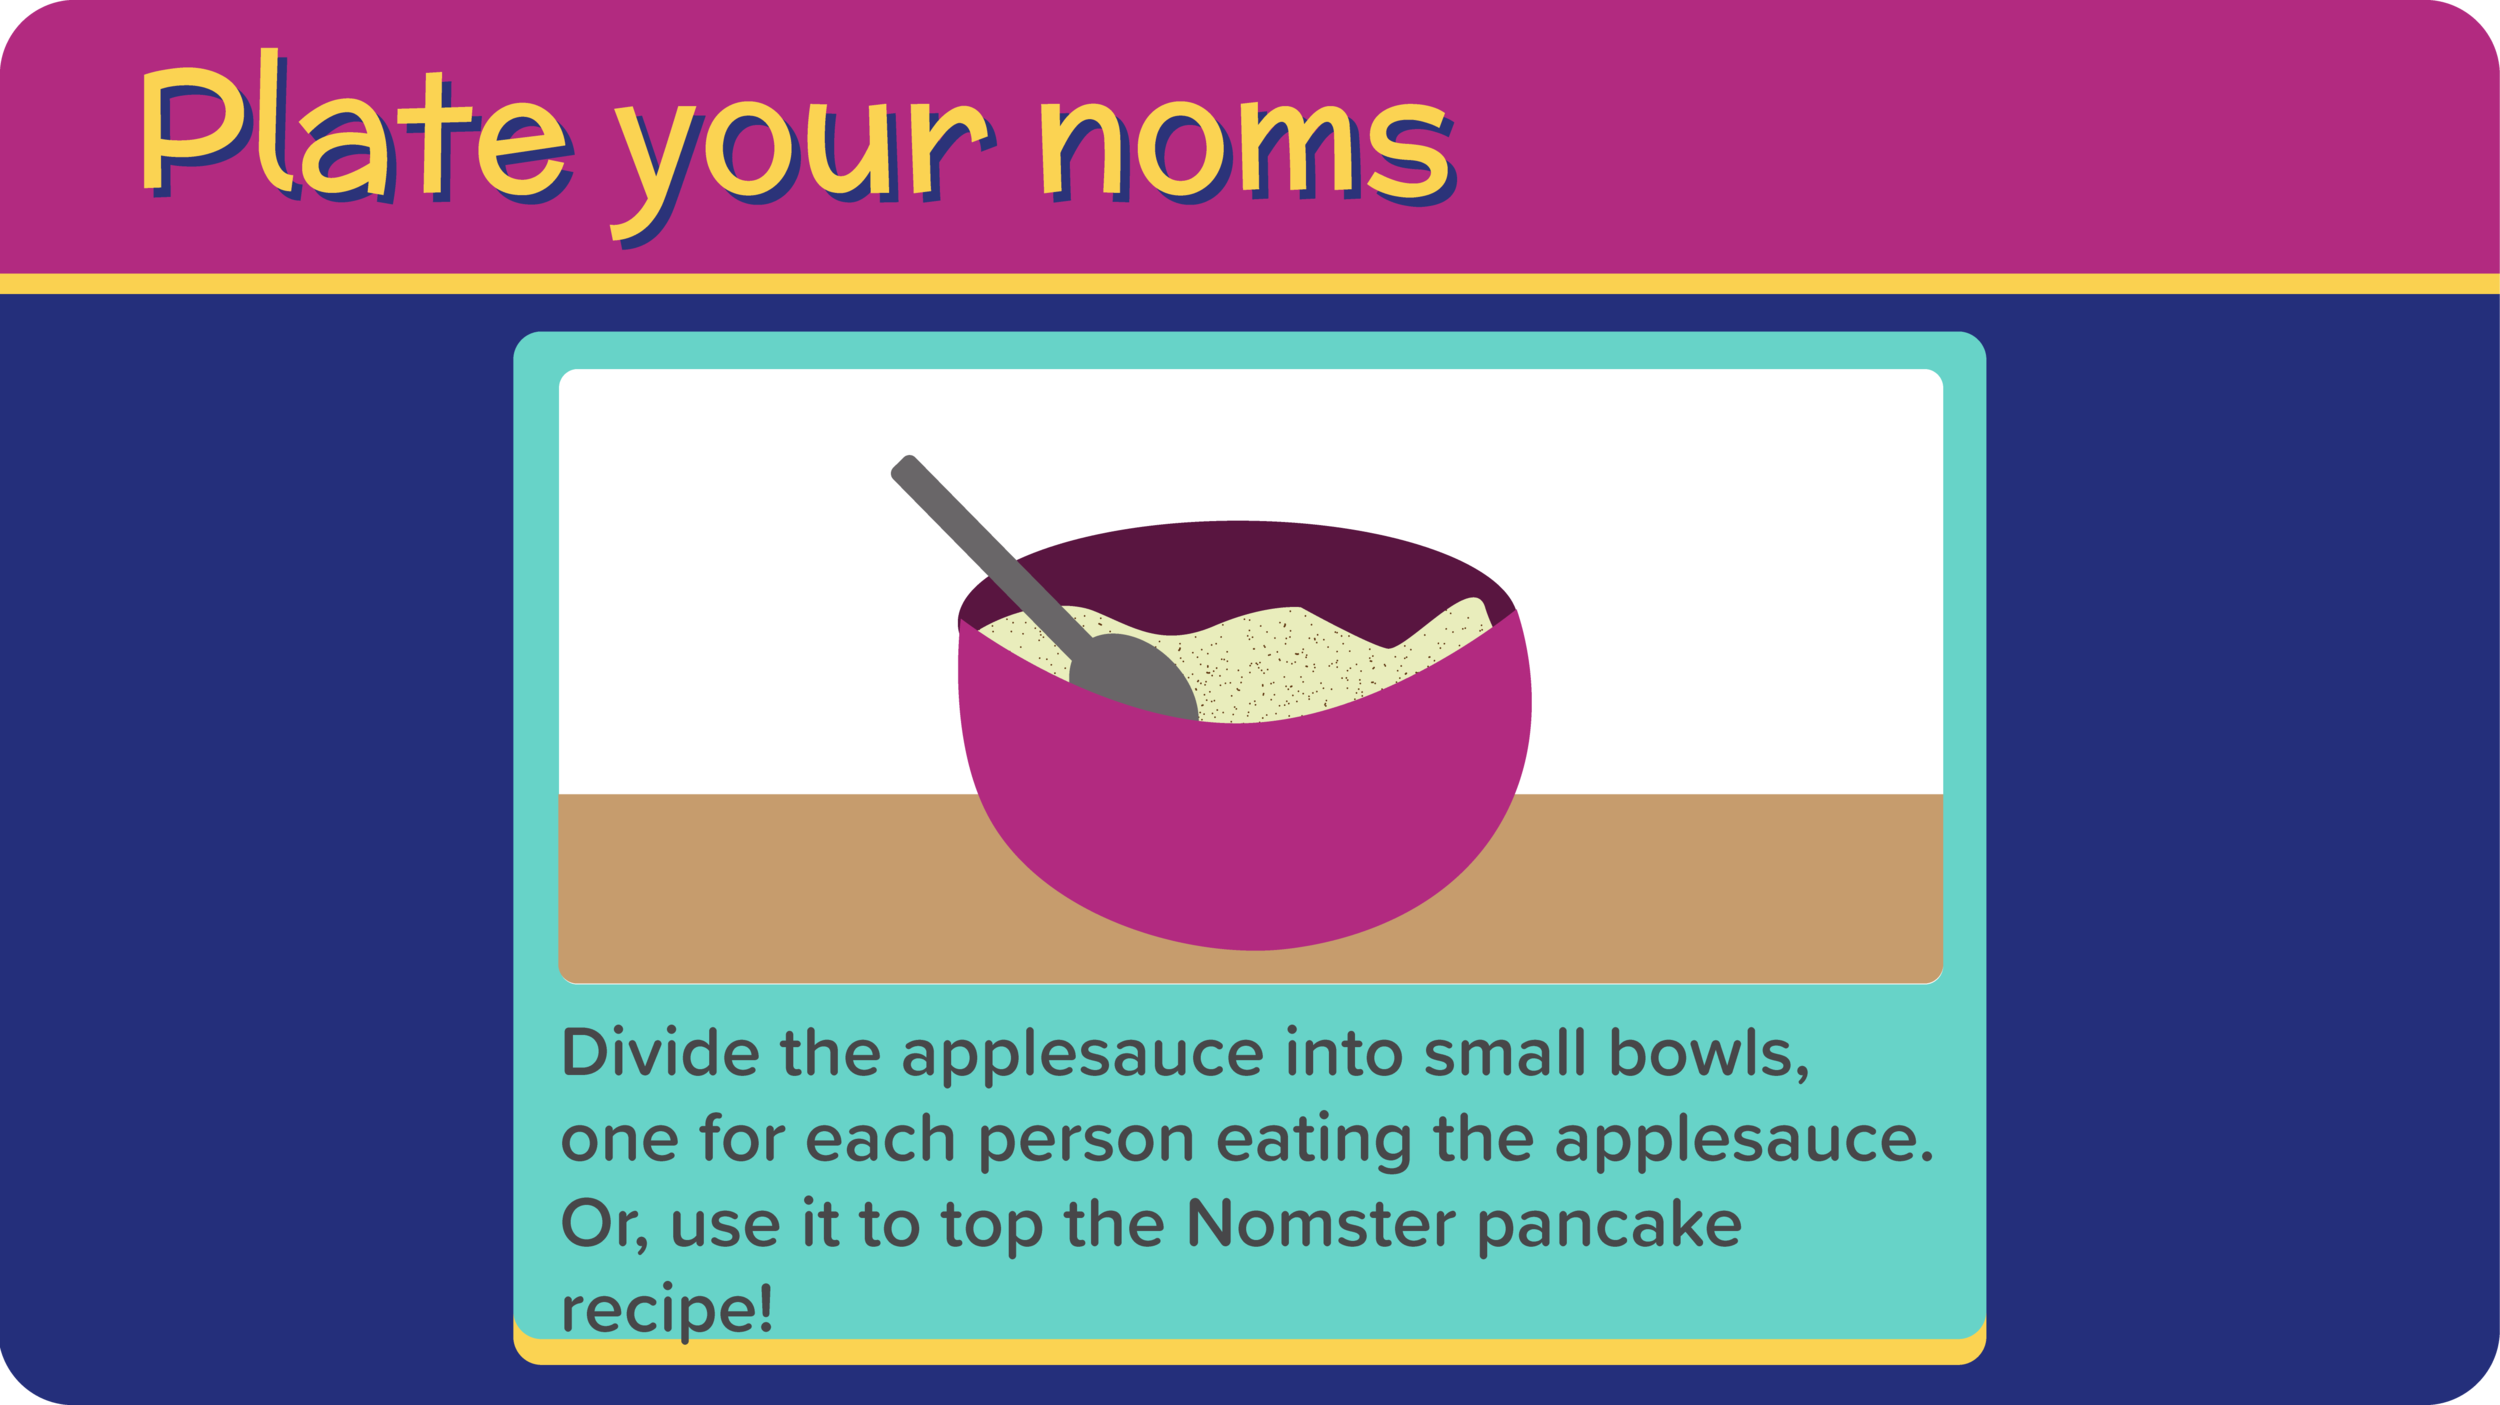 20_AppleSauce_plate your noms-01.png